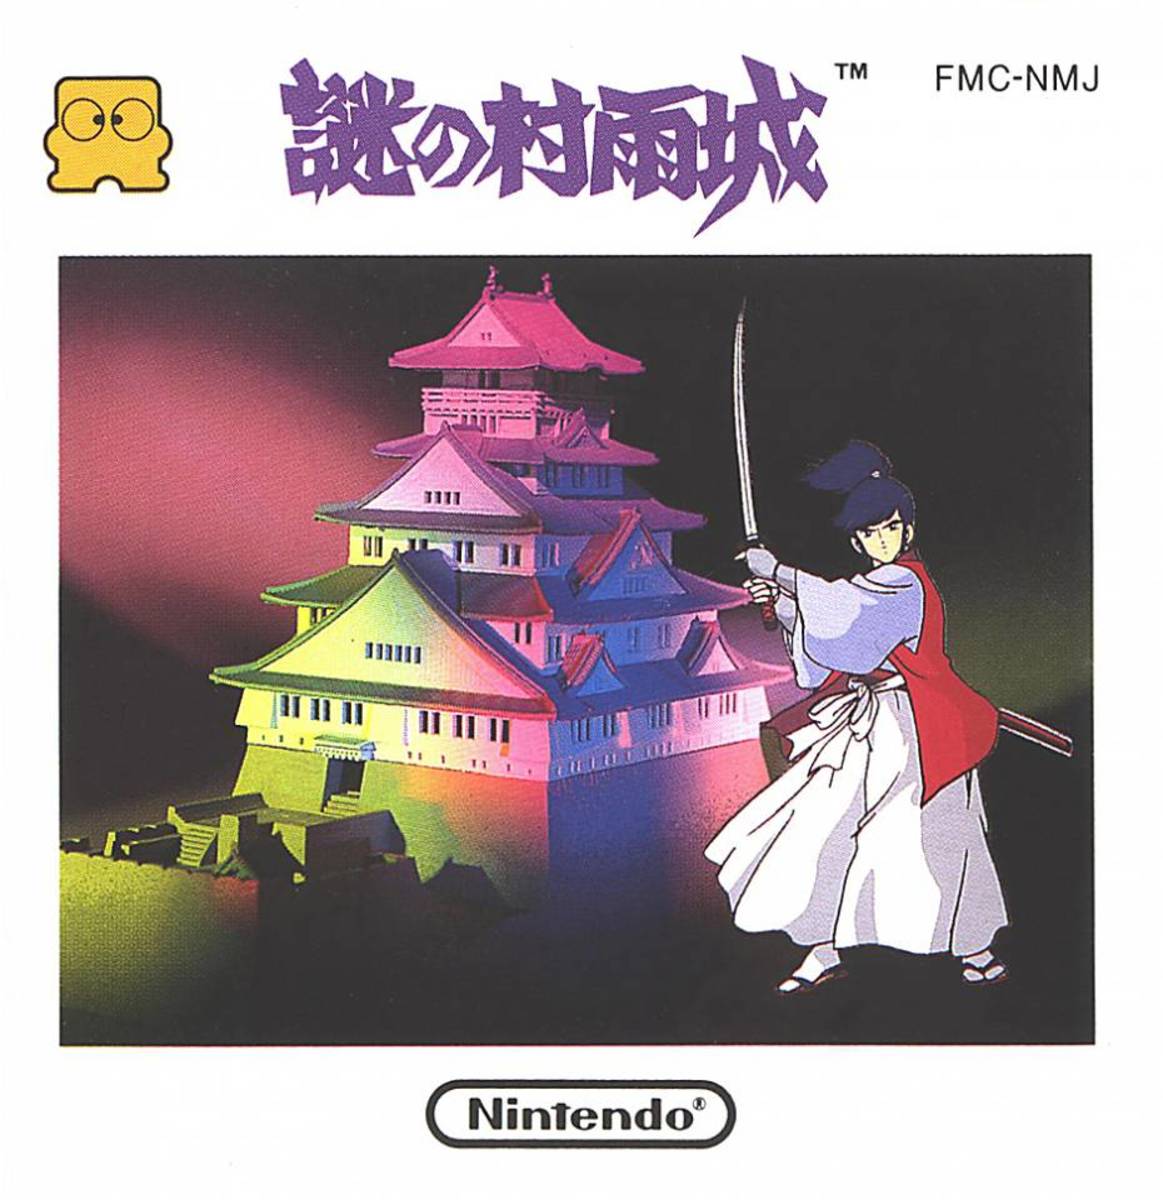 the cover right of the original game